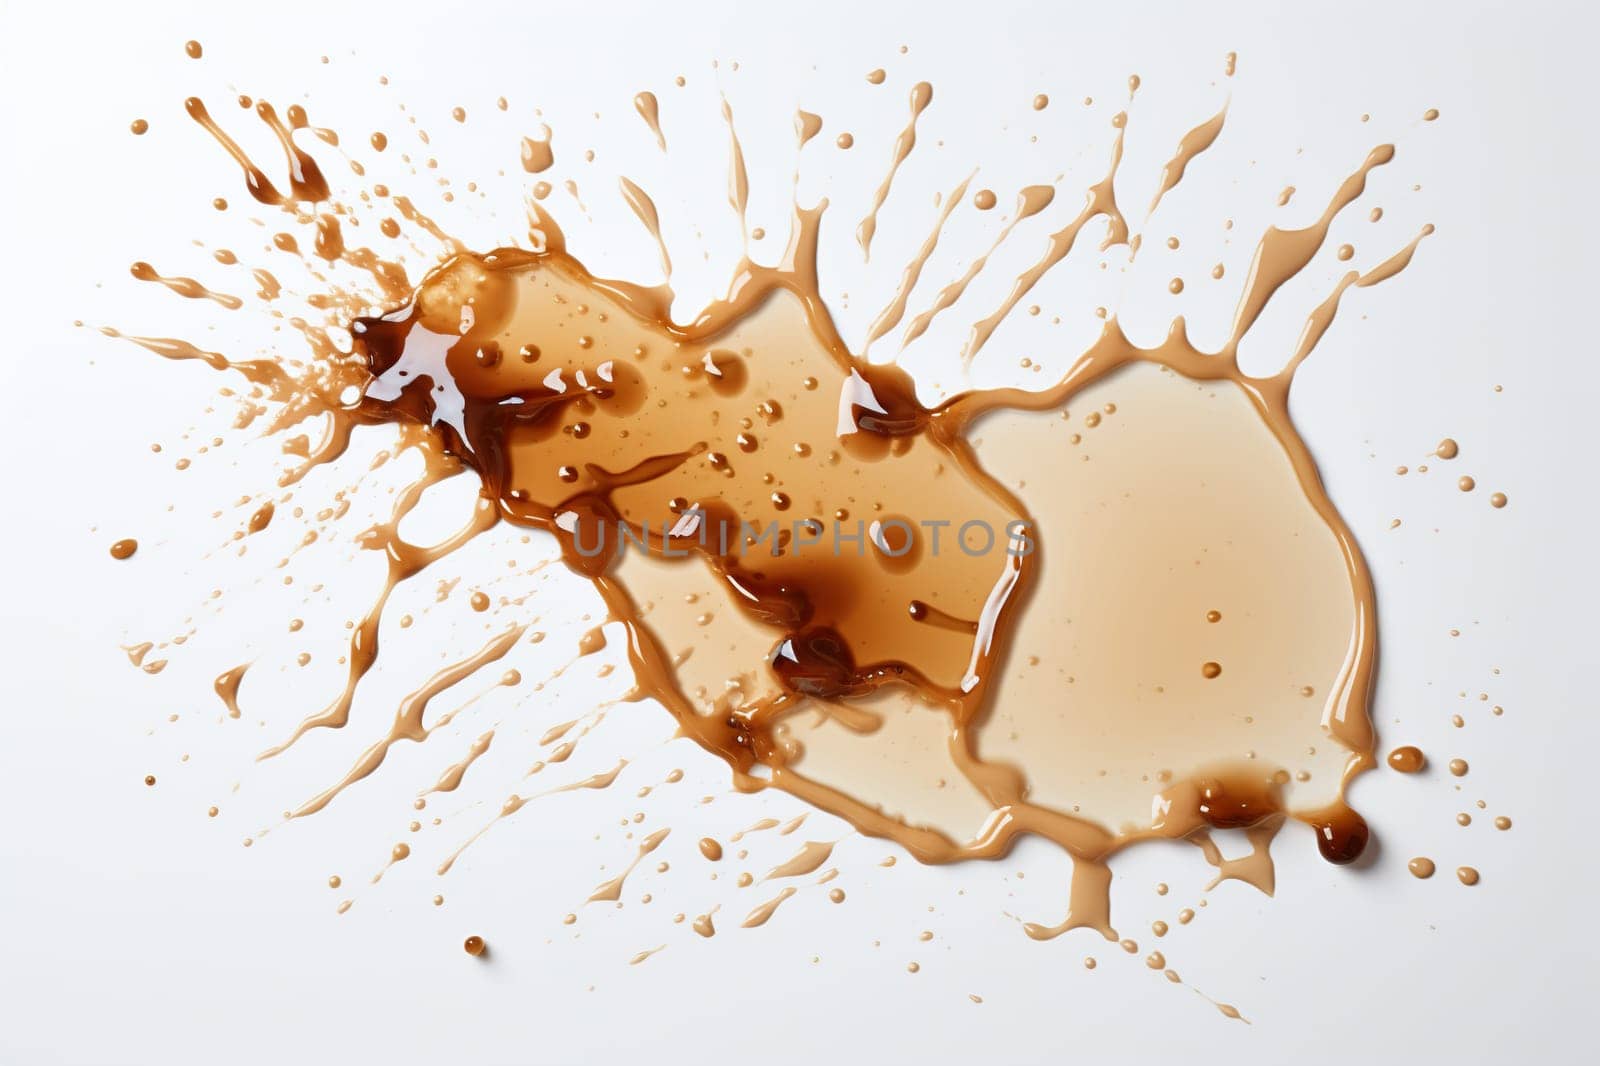 Splash, puddle of spilled black coffee on a white background. Generated by artificial intelligence by Vovmar